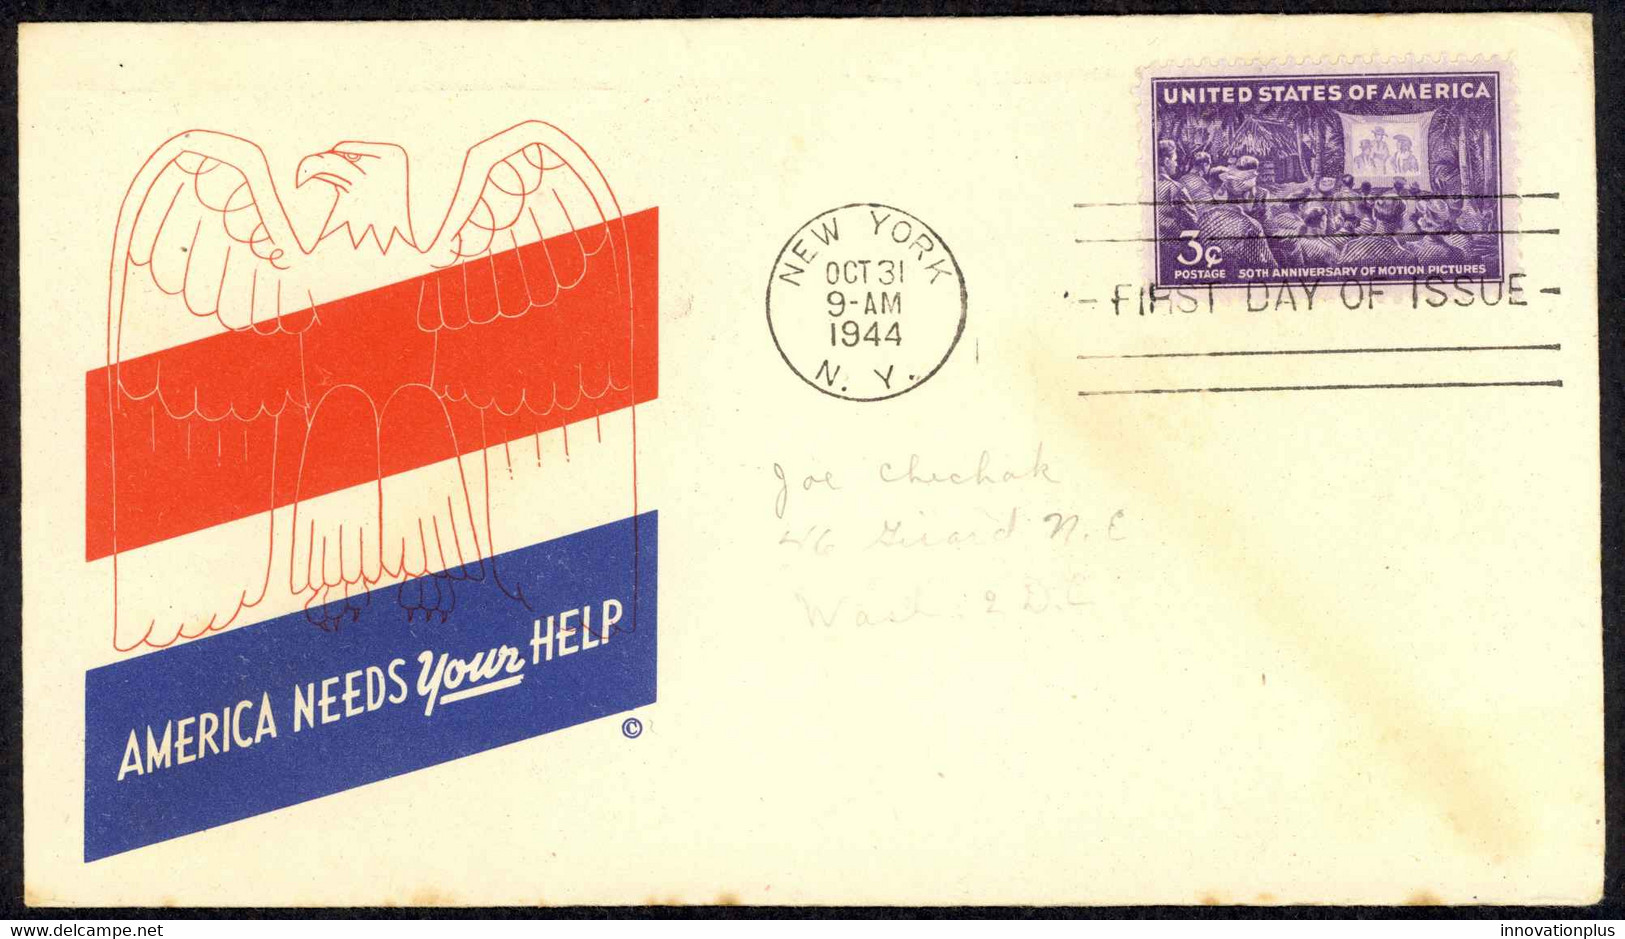 USA Sc# 926 (cachet) FDC (c) (New York, NY) 1944 10.31 Motion Pictures - 1941-1950